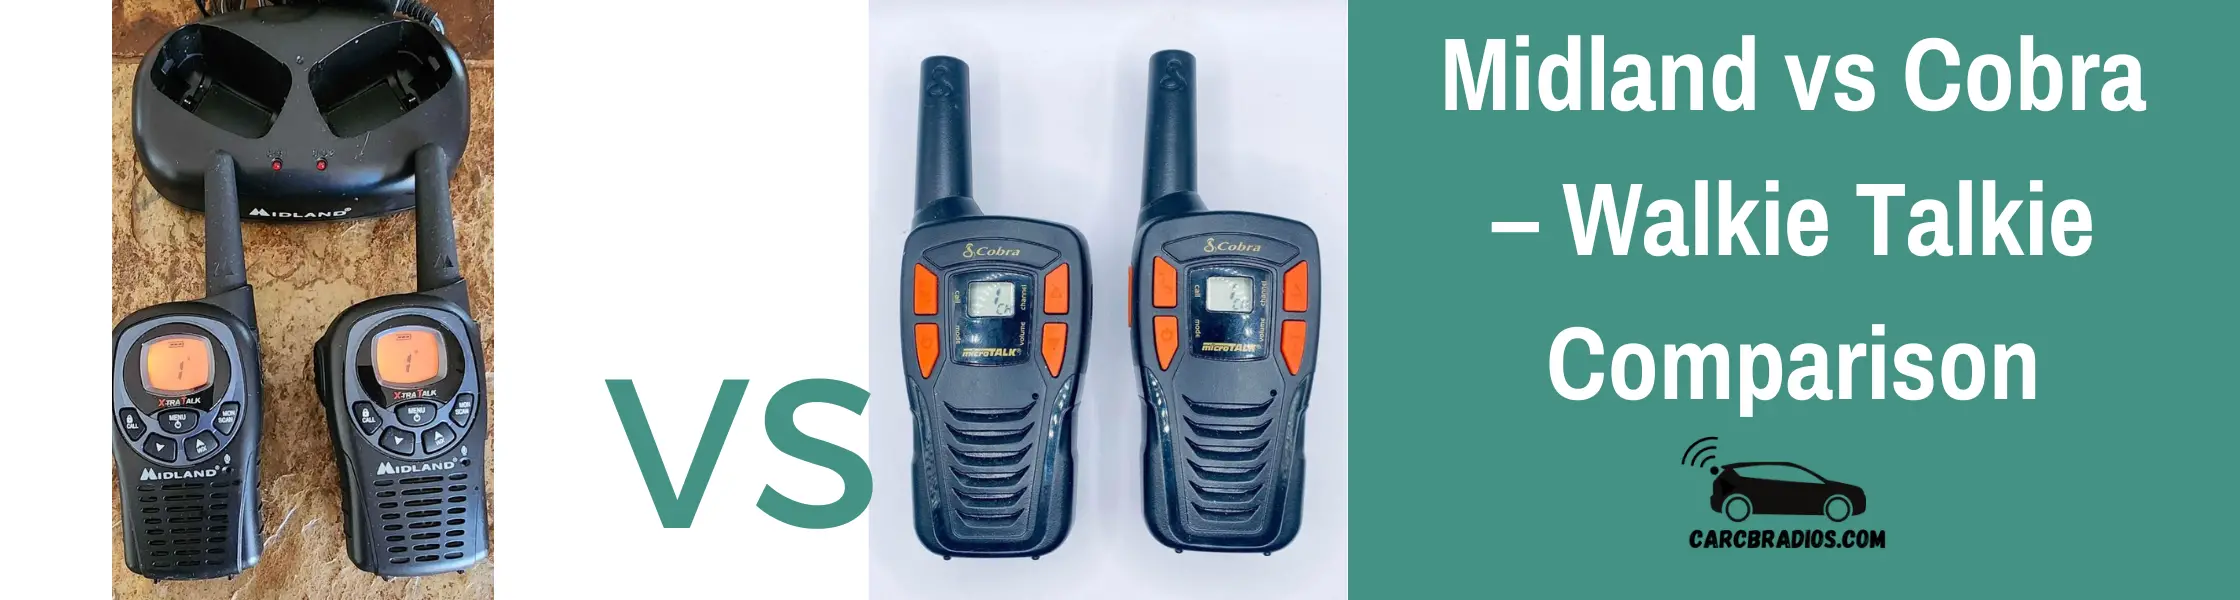 featured image of the article detailing the differences: Midland vs Cobra – Walkie Talkie Comparison